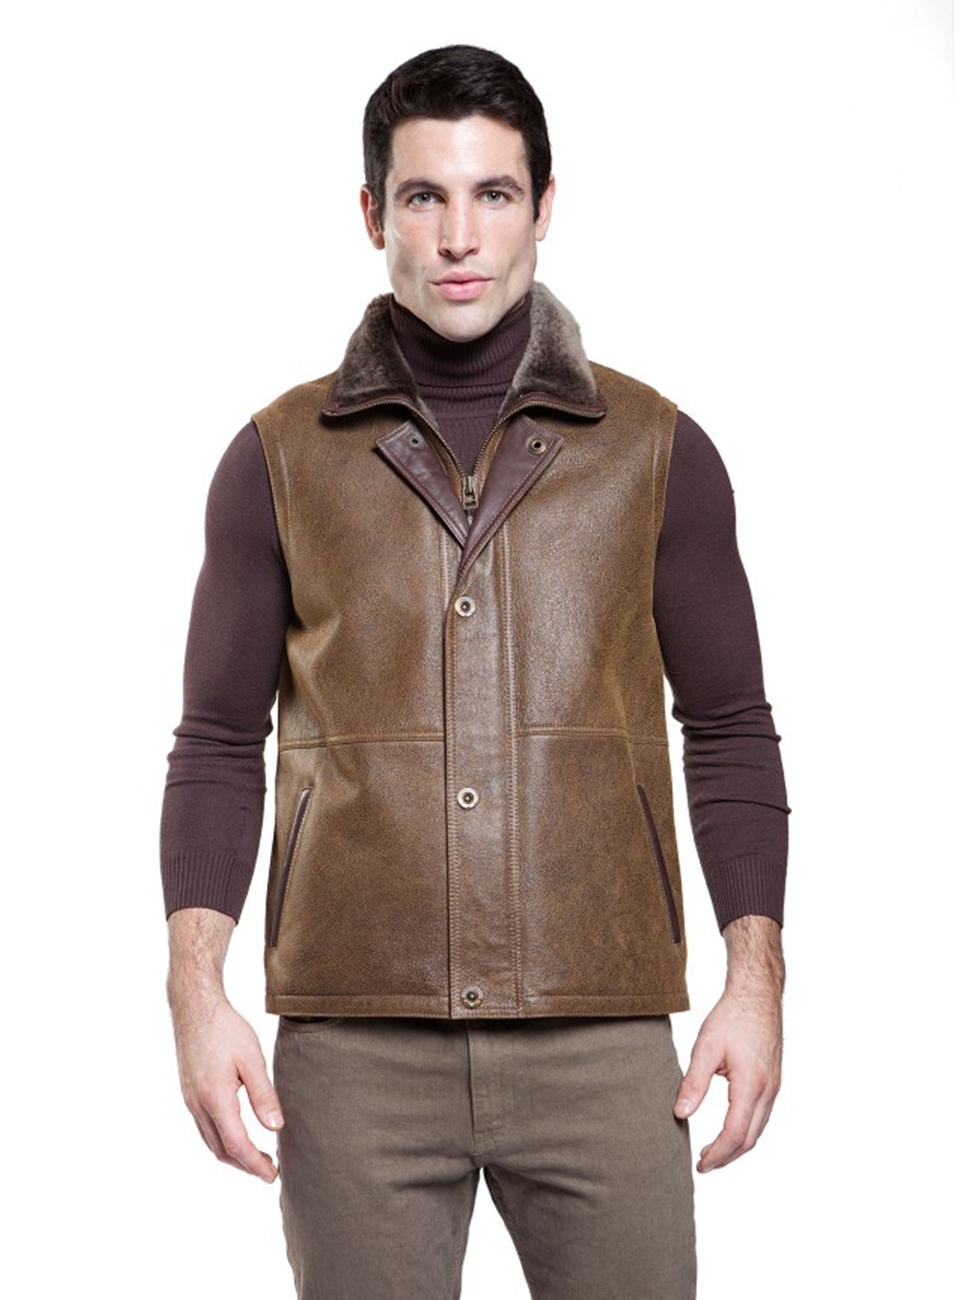 Rugged Whiskey Shearling Men's Vest | Aston Leather Shearling ...